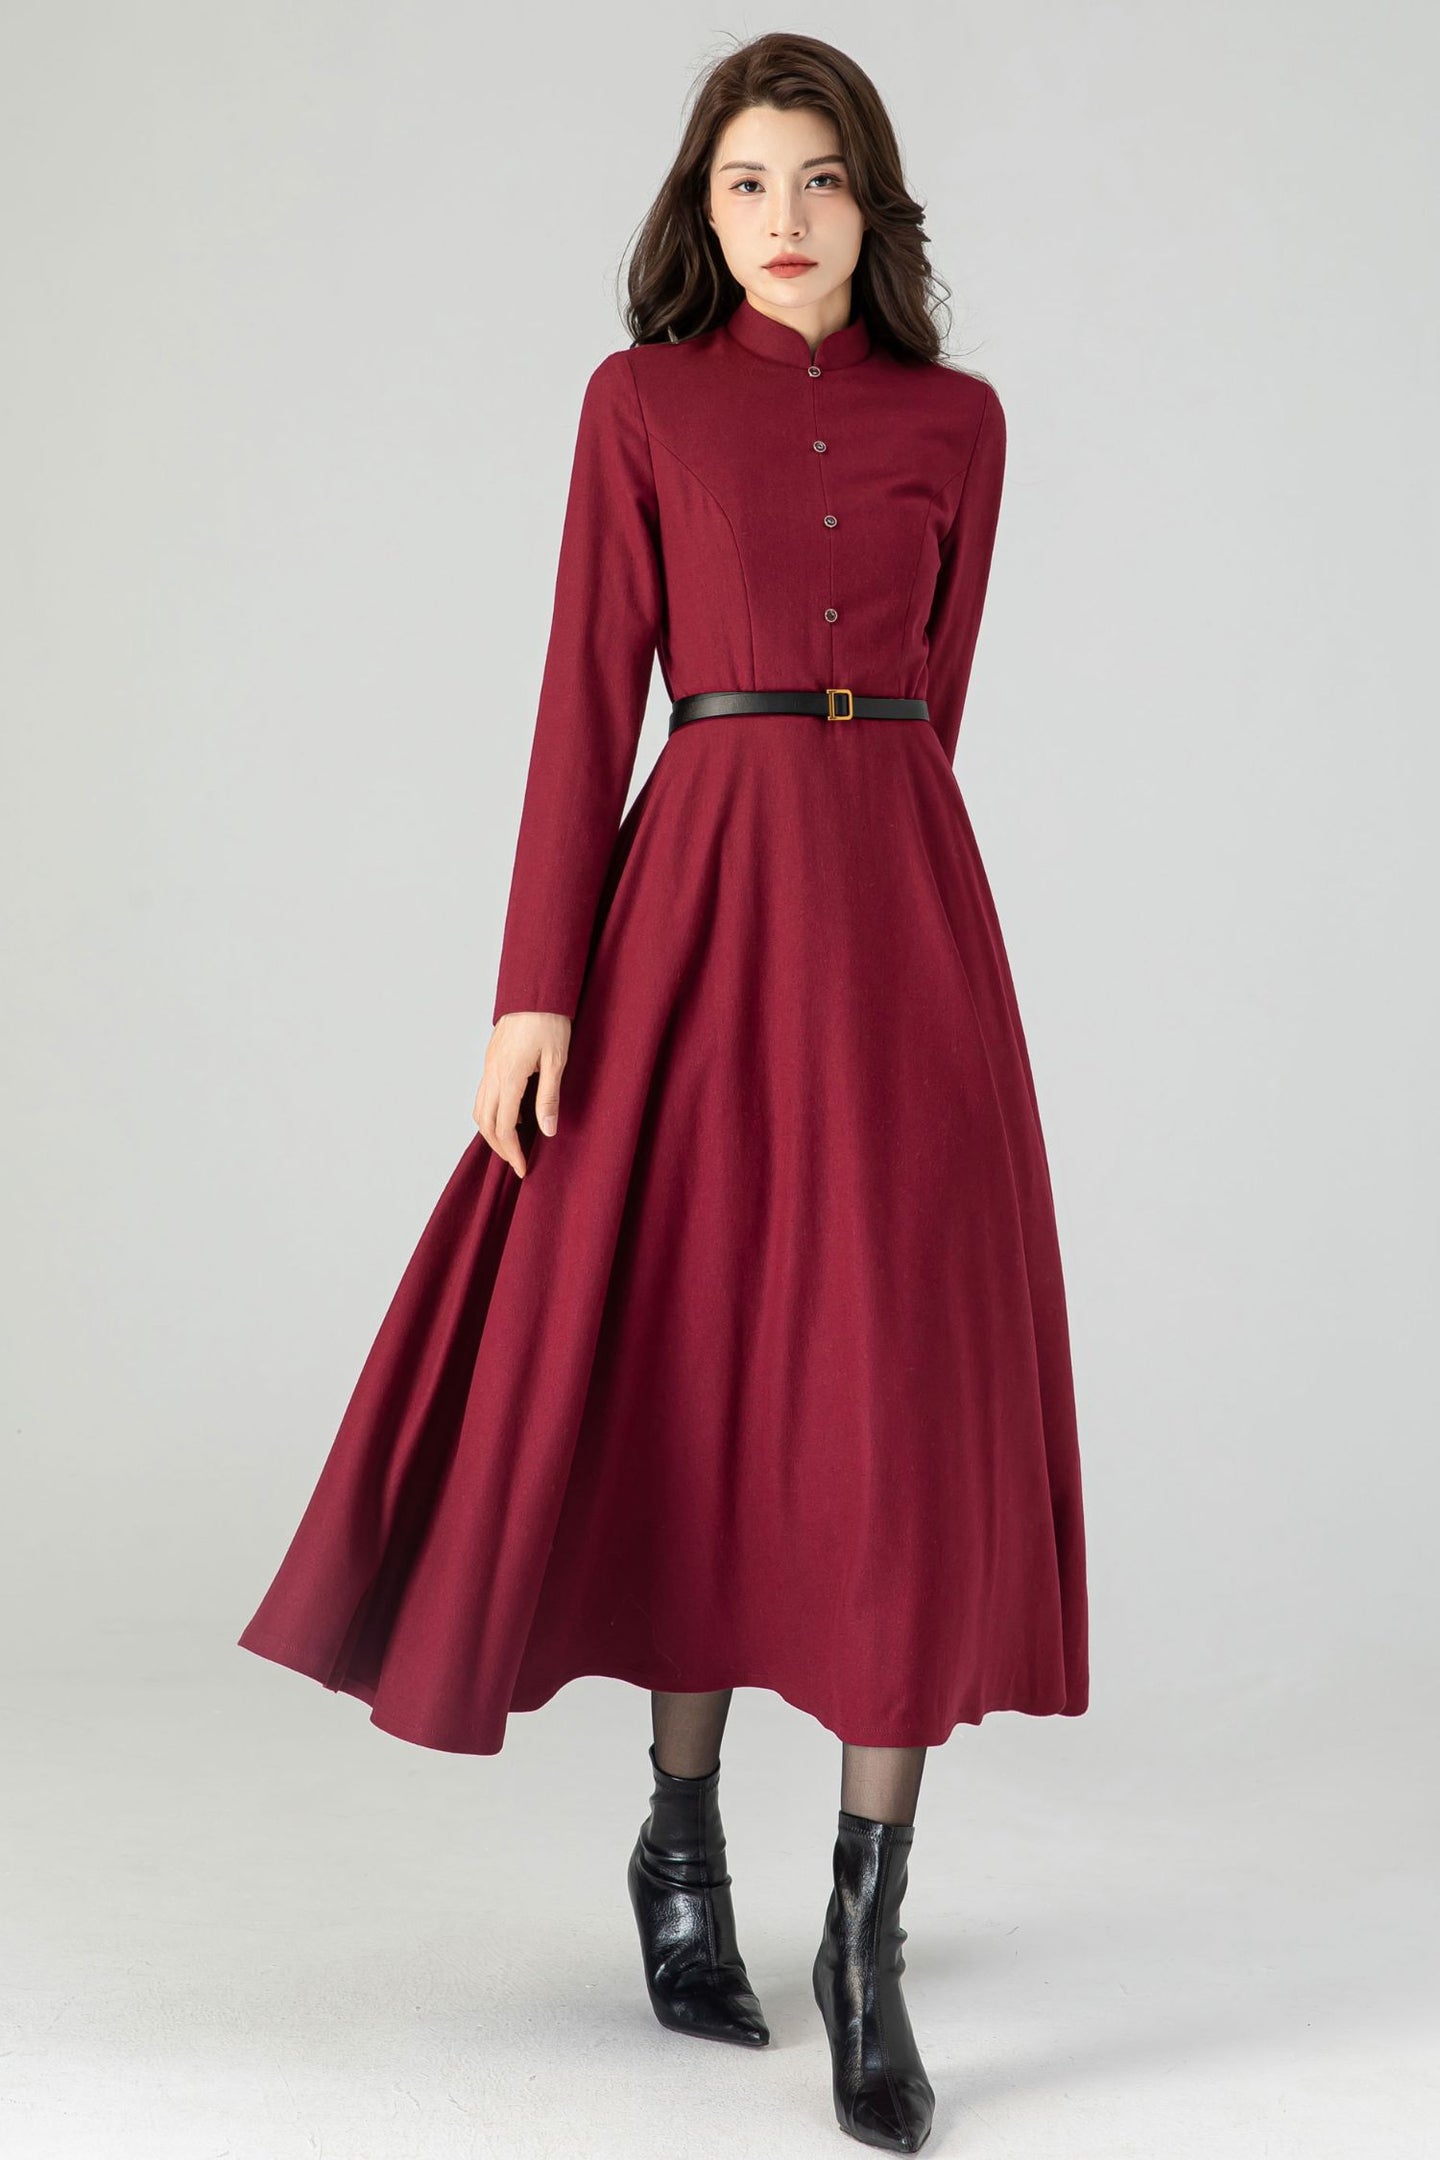 Burgundy Wool Fit and Flare Dress C3610